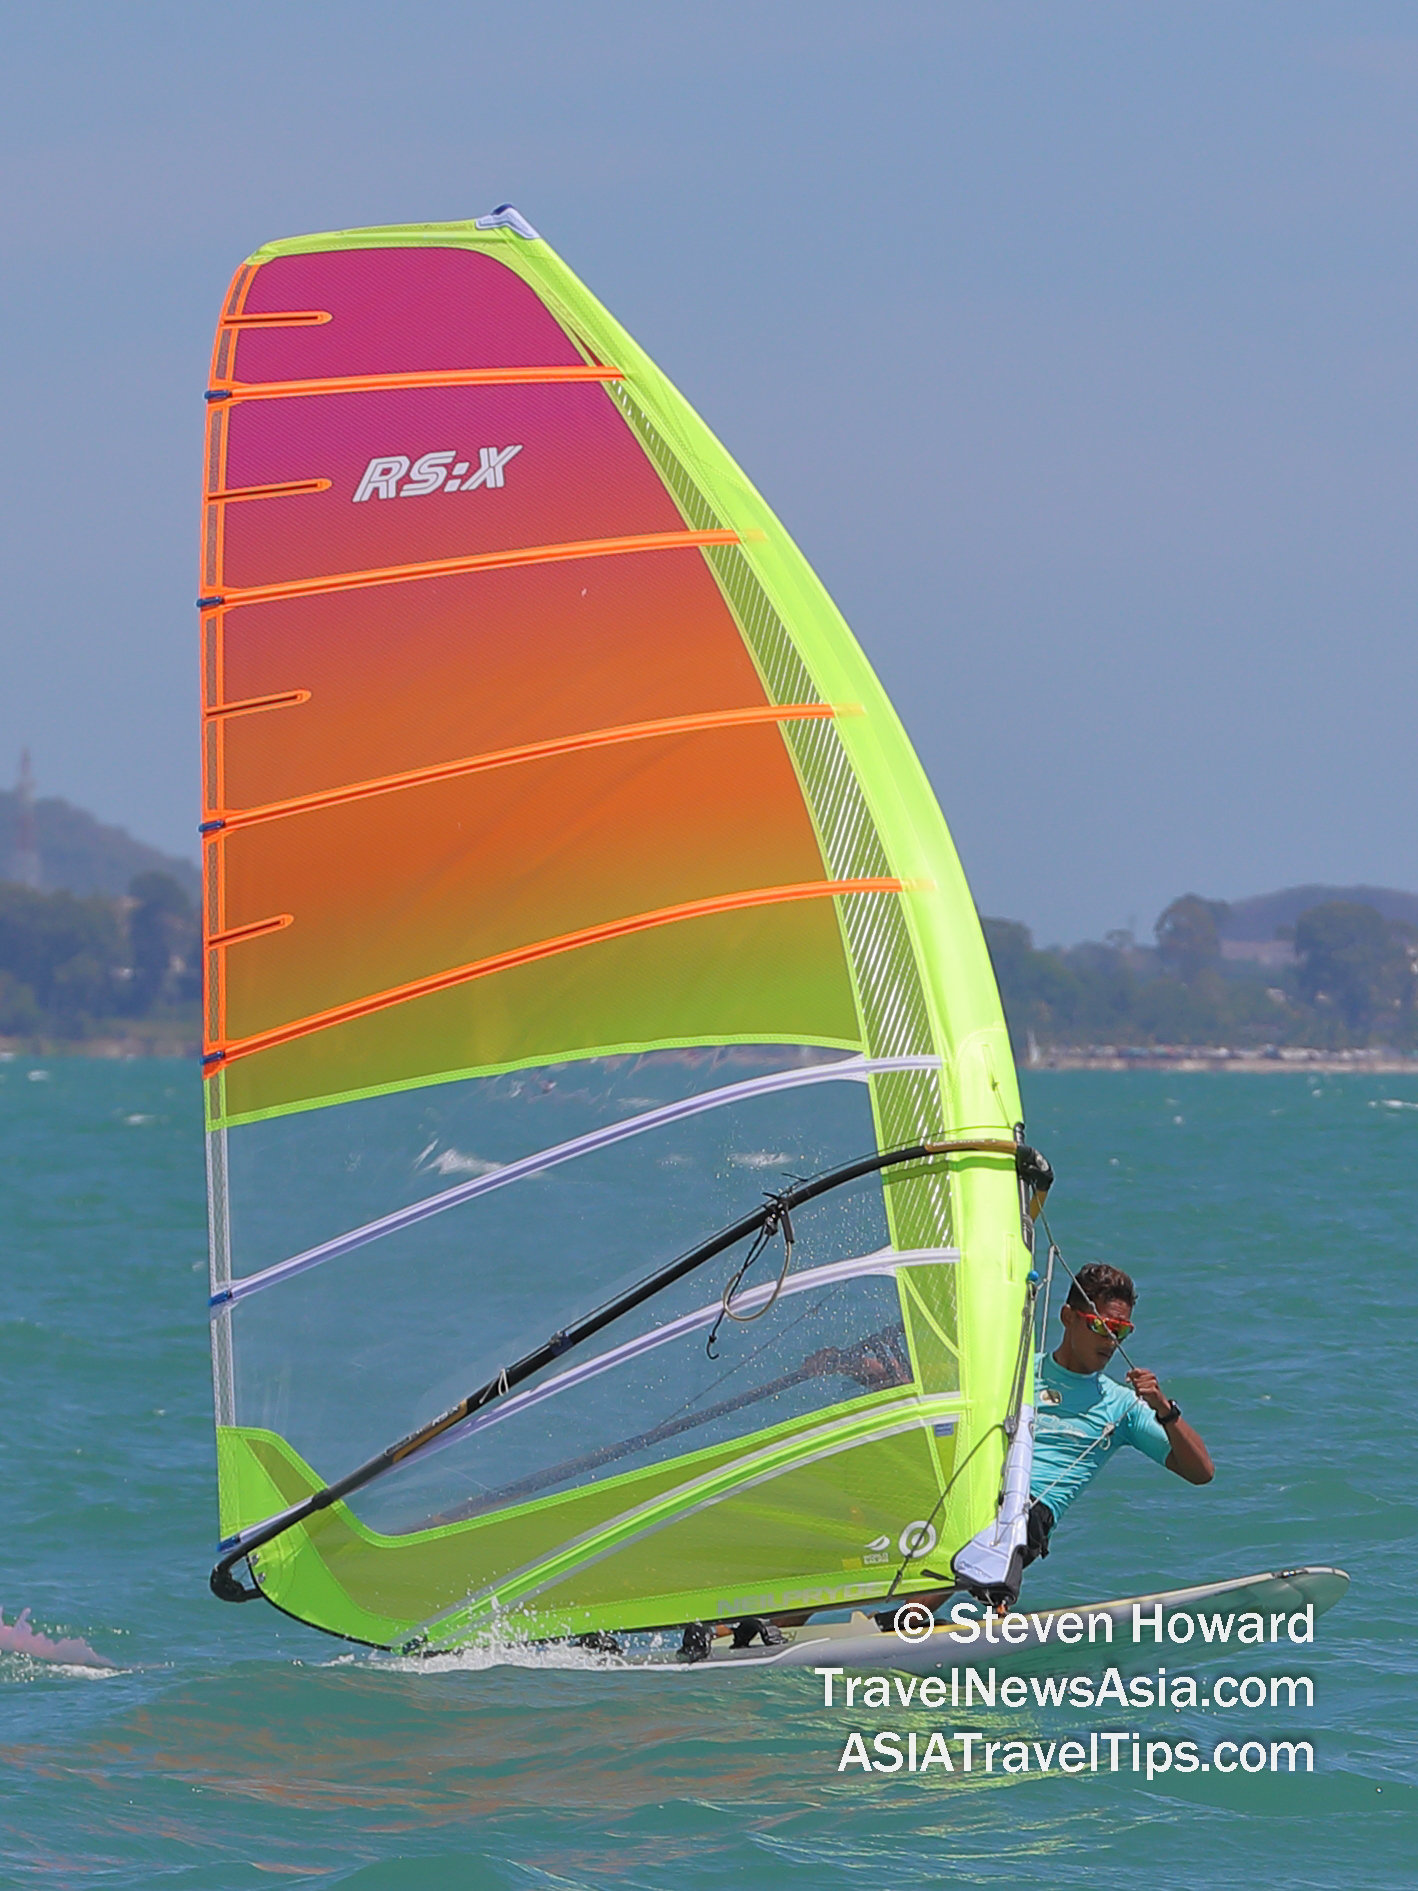 Into the second day of racing for the RS:X and RS:One windsurf classes and a pattern is emerging. Ahmad Denish Bin Aboul Hadi Kane dominated in the RS:X today with three wins from four races, while GLH Cheow Lin had to settle for a string of seconds ahead of Nuur Fatin Sulghah Neinti Abdyl Ravman who sits third overall. Picture by Steven Howard of TravelNewsAsia.com Click to enlarge.